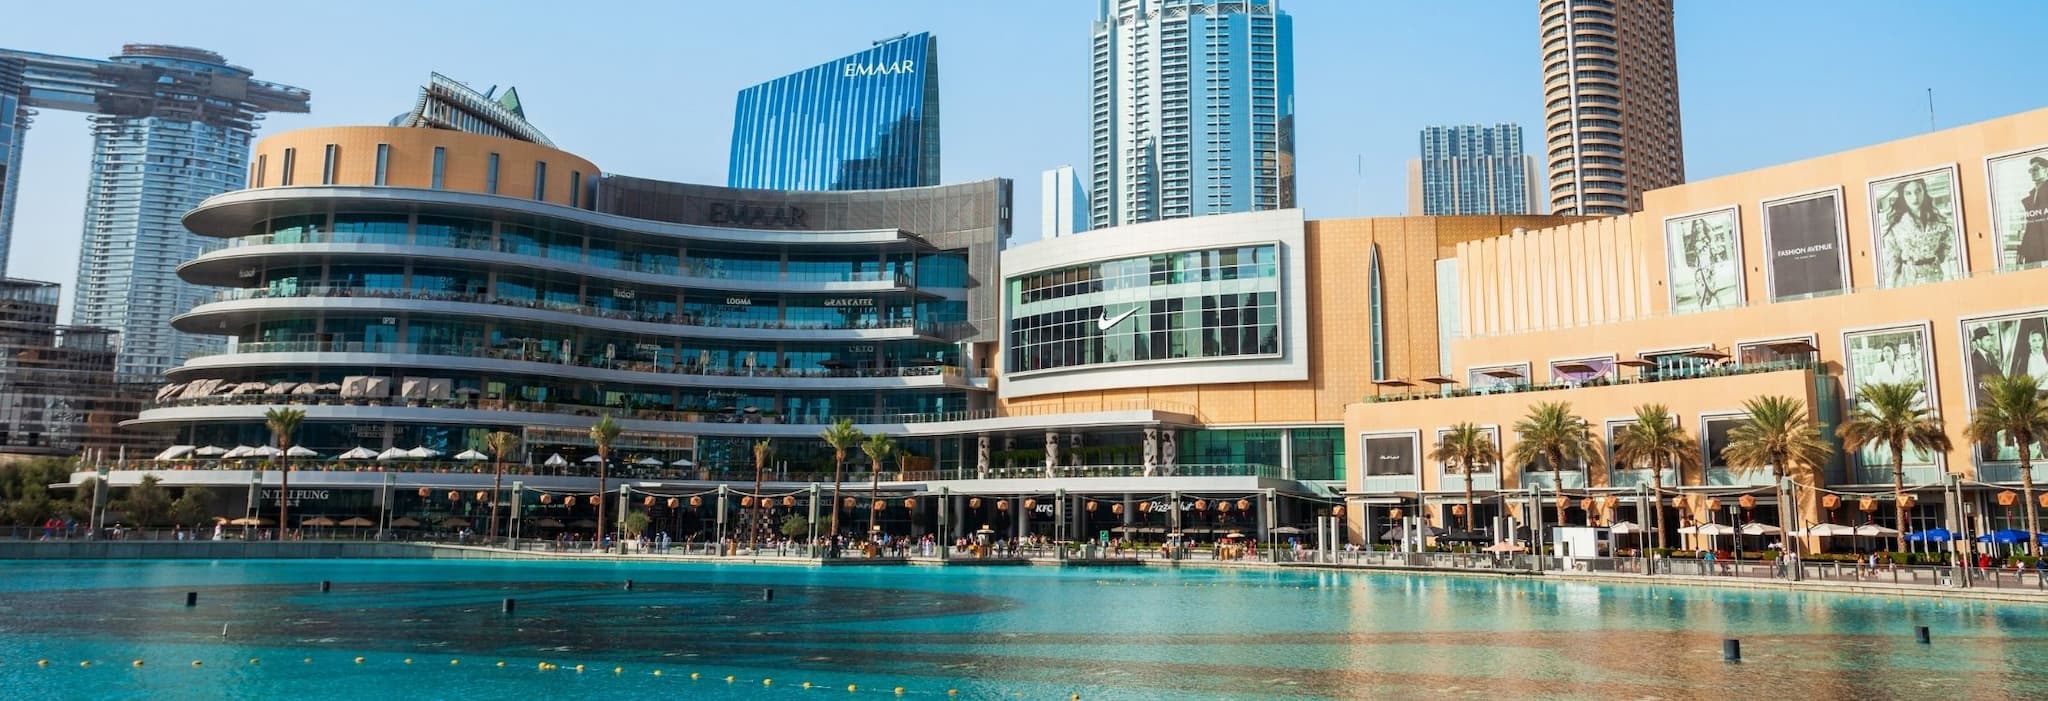 10 Facts About The Dubai Mall